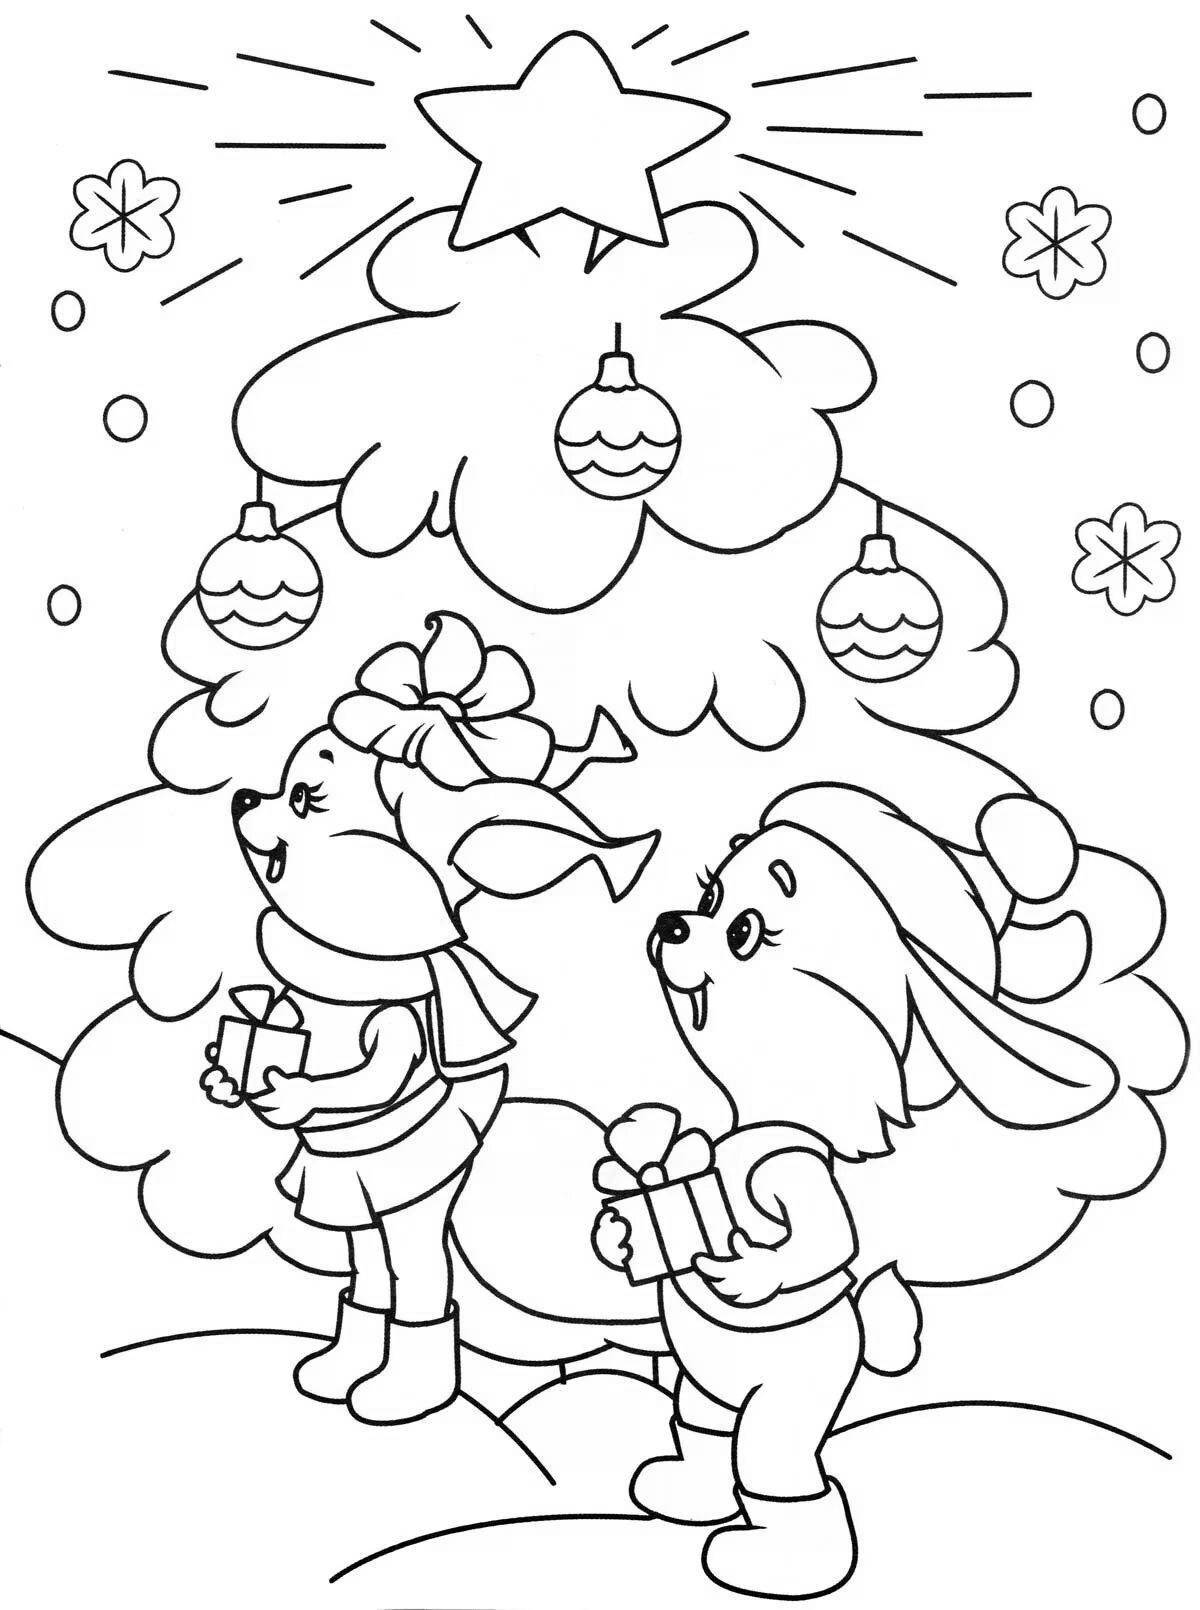 Glorious frost and hare coloring book